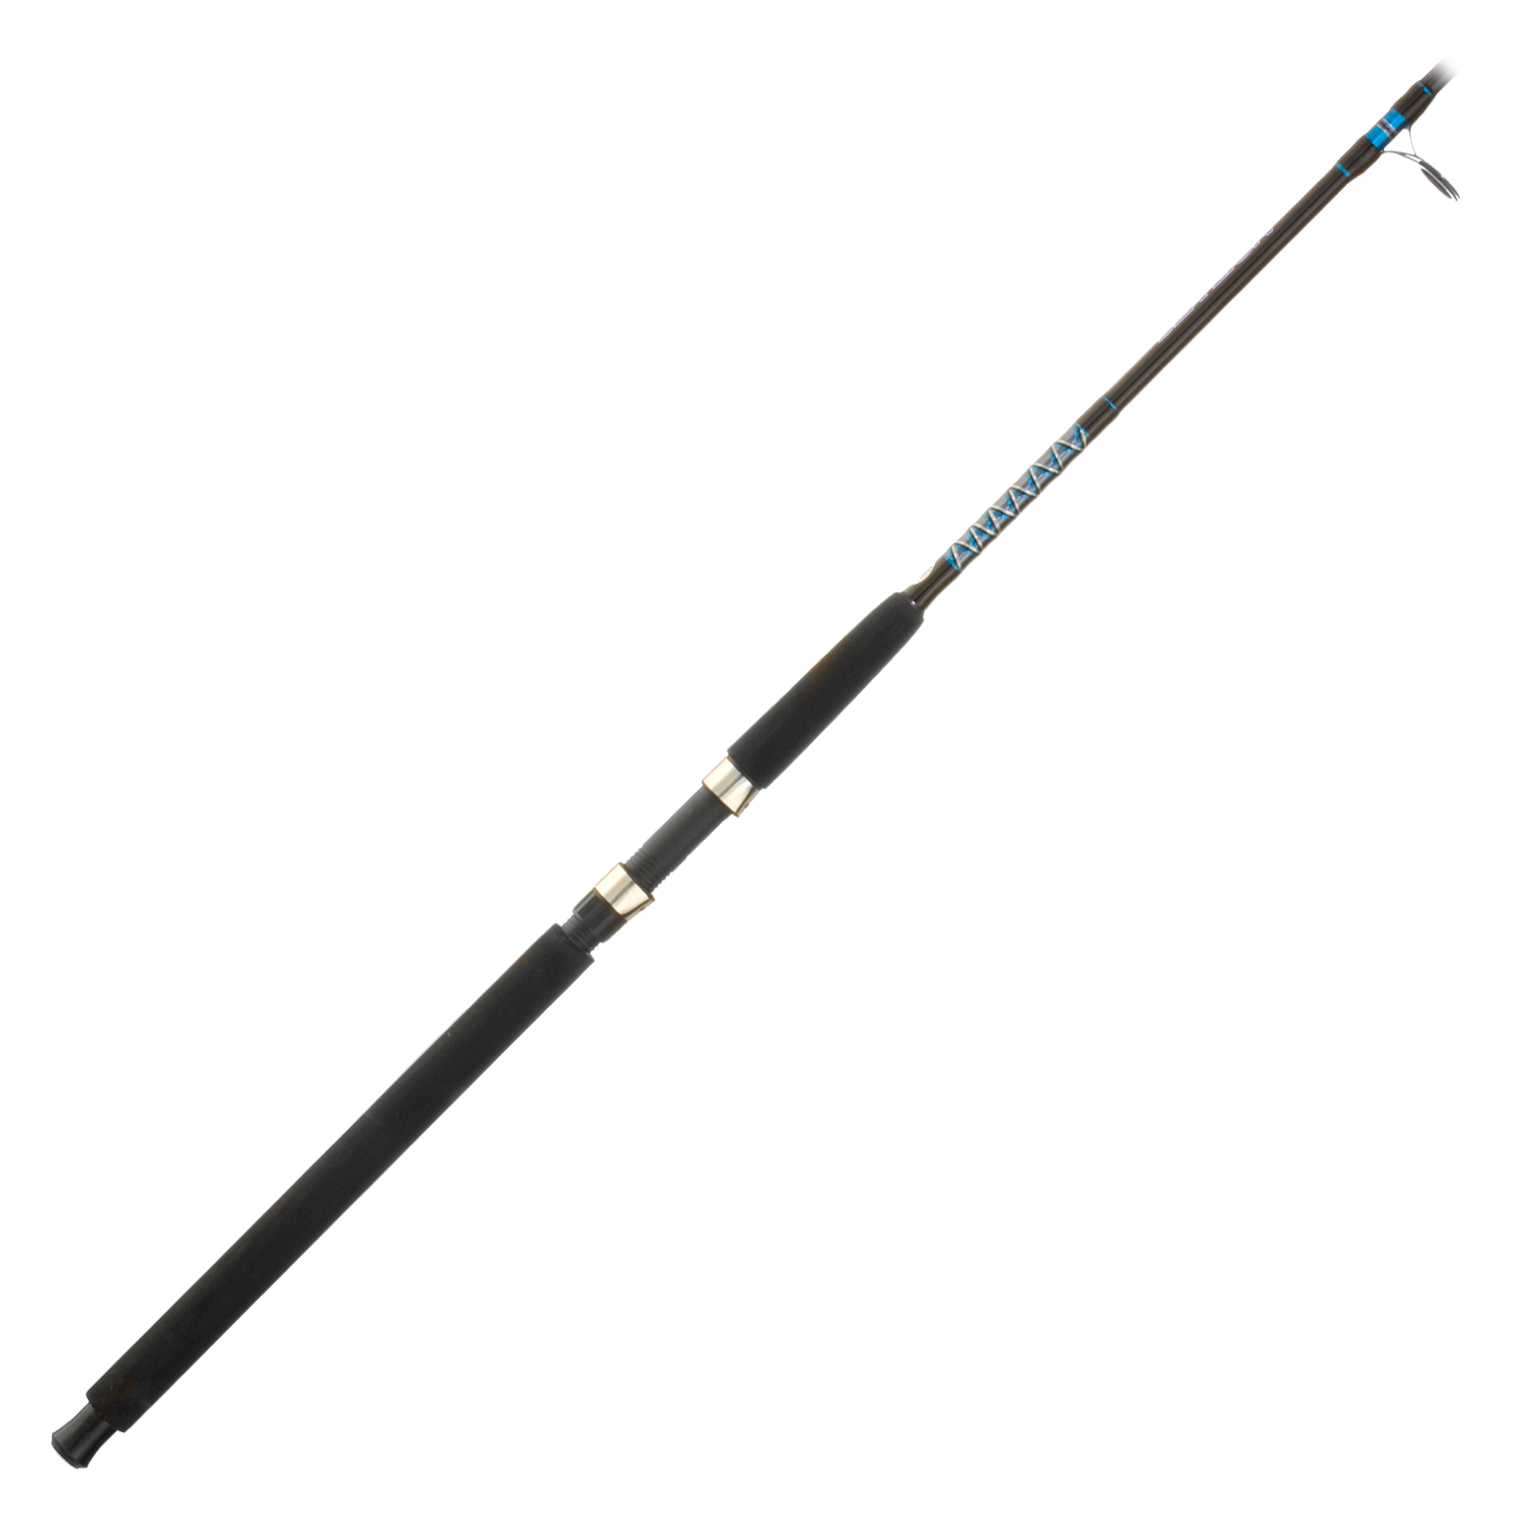 Ebnl New Lure Rod Sea and Freshwater Fishing Rod Spinning and Casting Rod  1.98m/2.08m/2.29m/2.43m